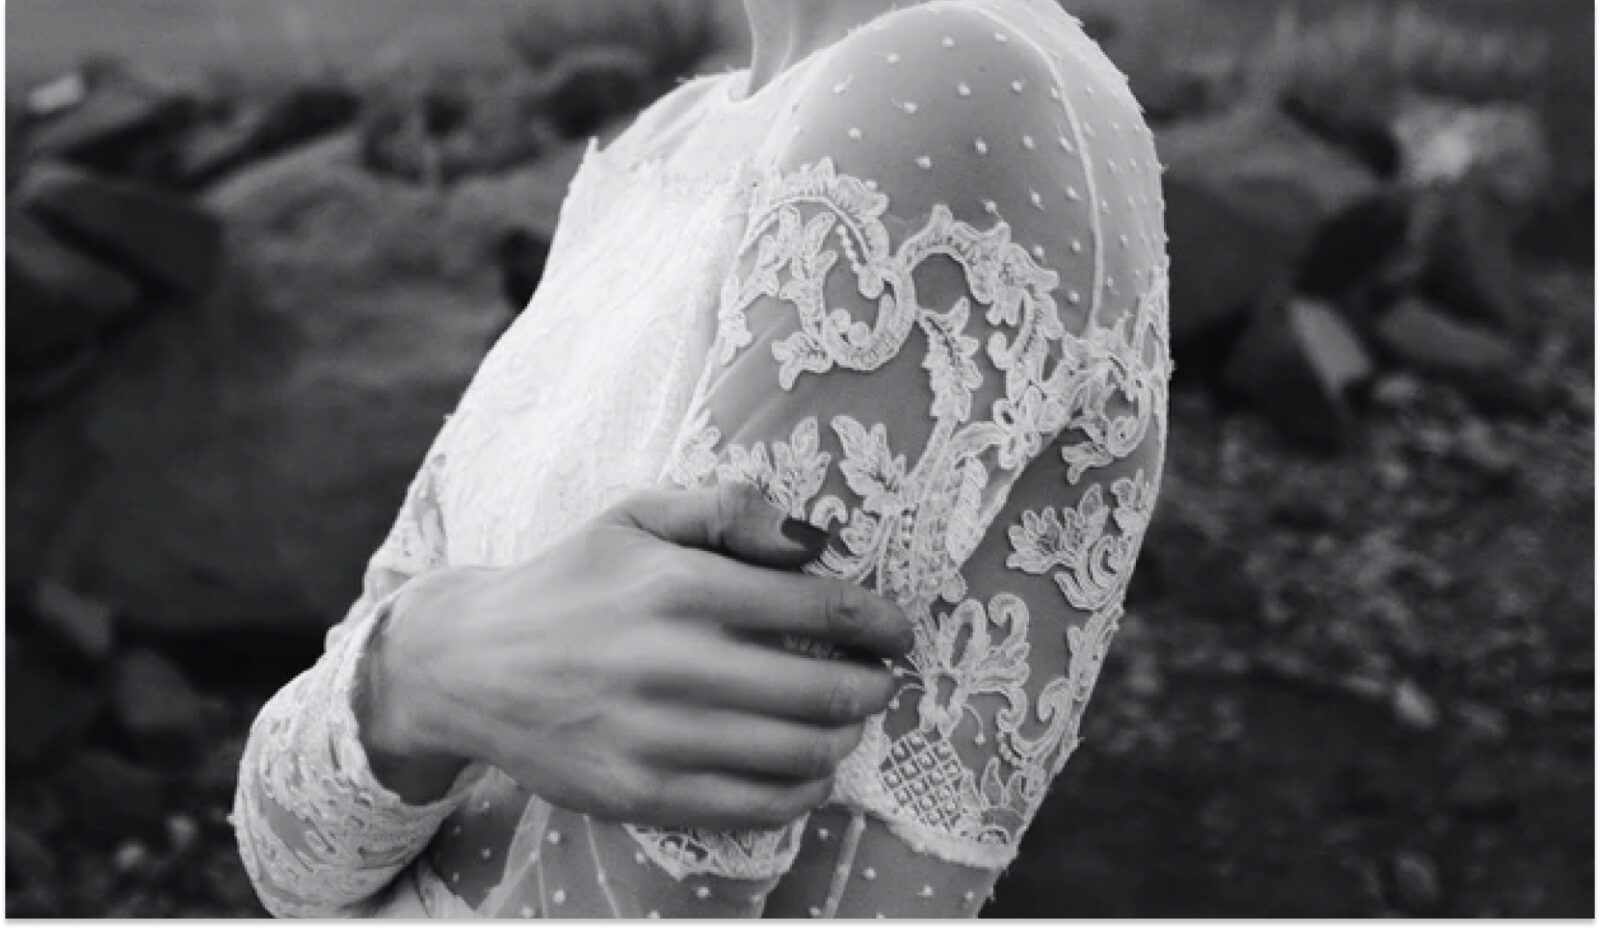 A woman’s wedding dress in black and white